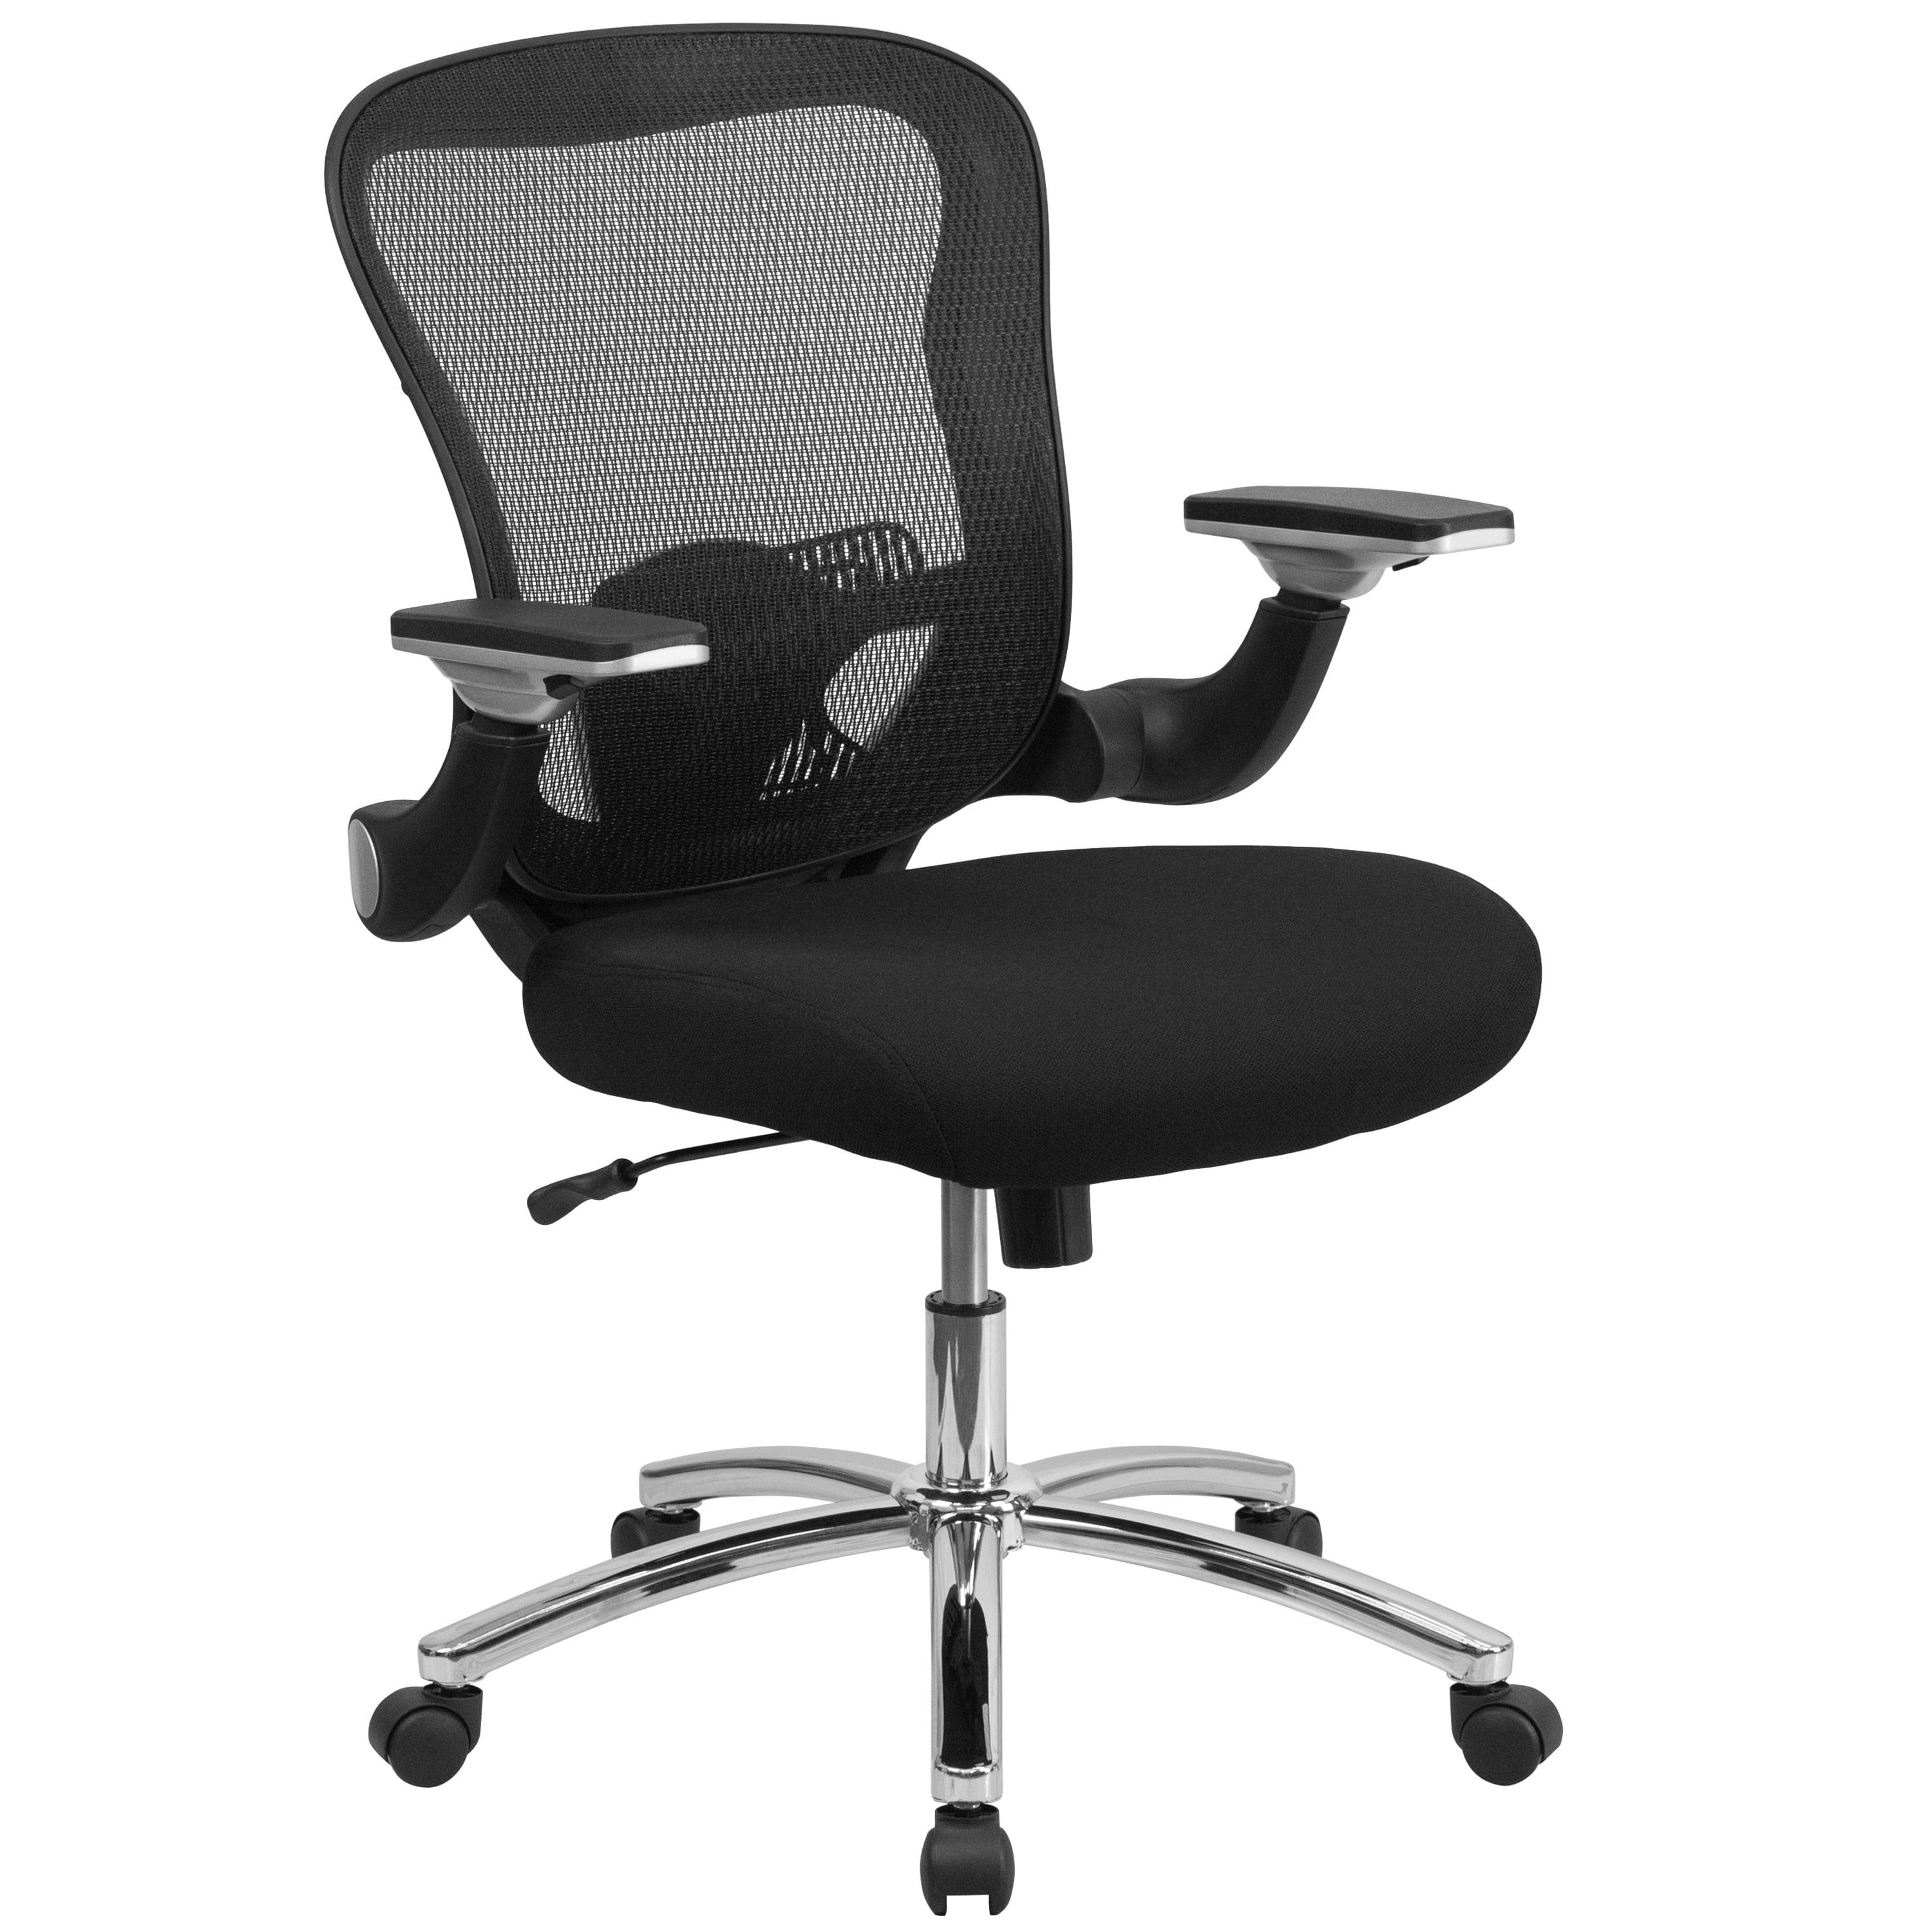 Sam Mid-Back Black Mesh Executive Chair with Adjustable Swivel Arms